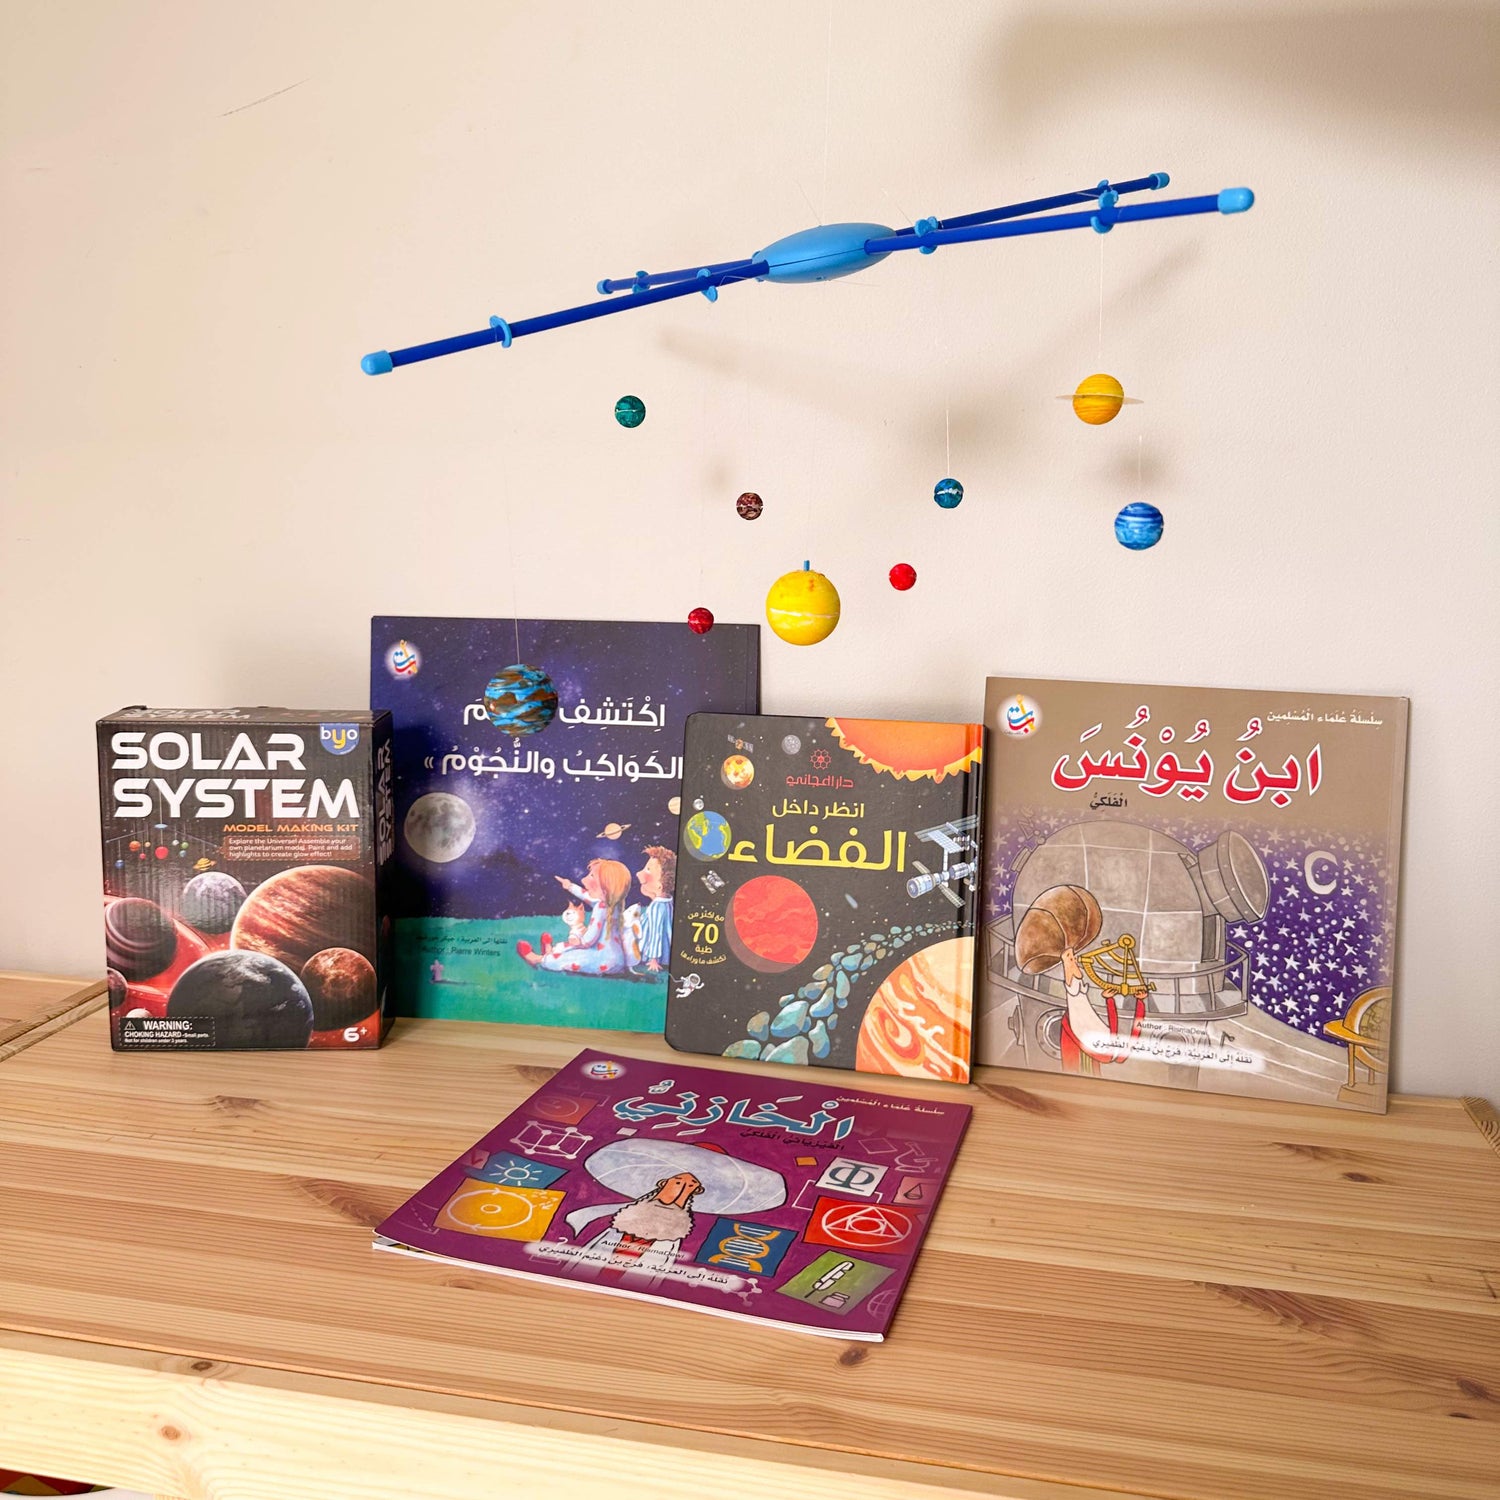 Arabic books for kids about Space and Solar system model